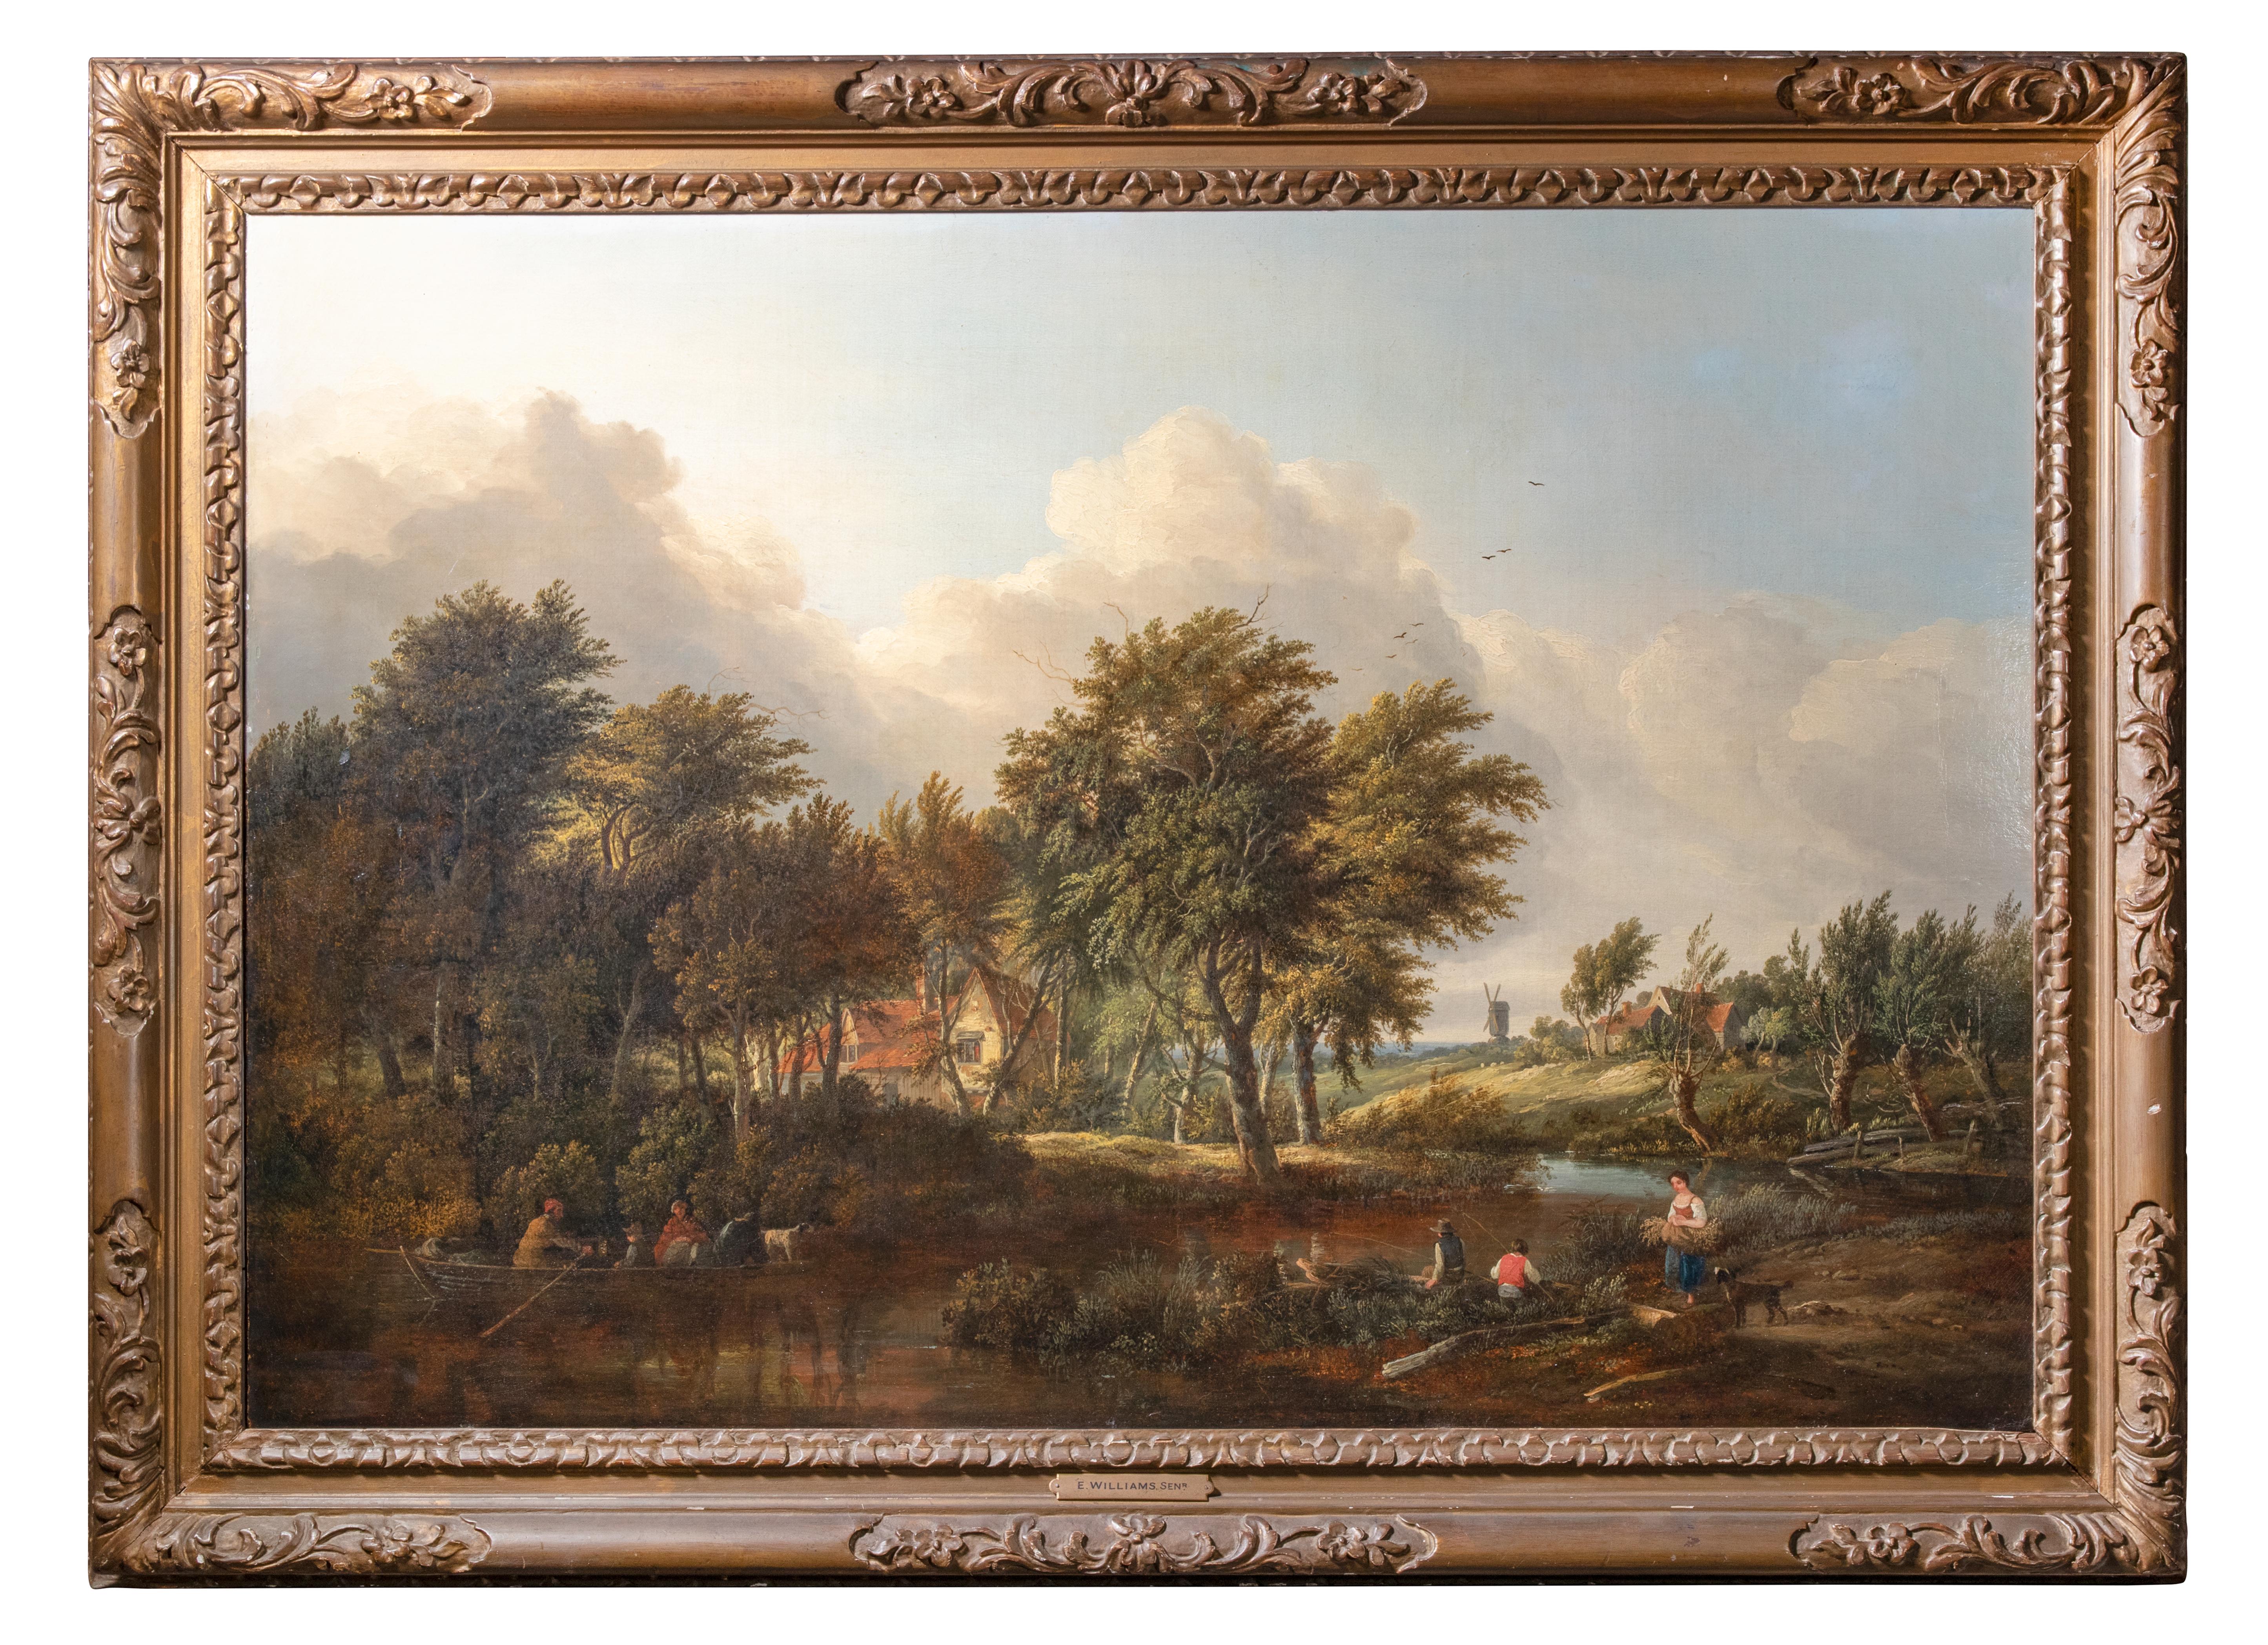 Unknown Figurative Painting - Landscape with Stream - Oil on Canvas - 18th Century